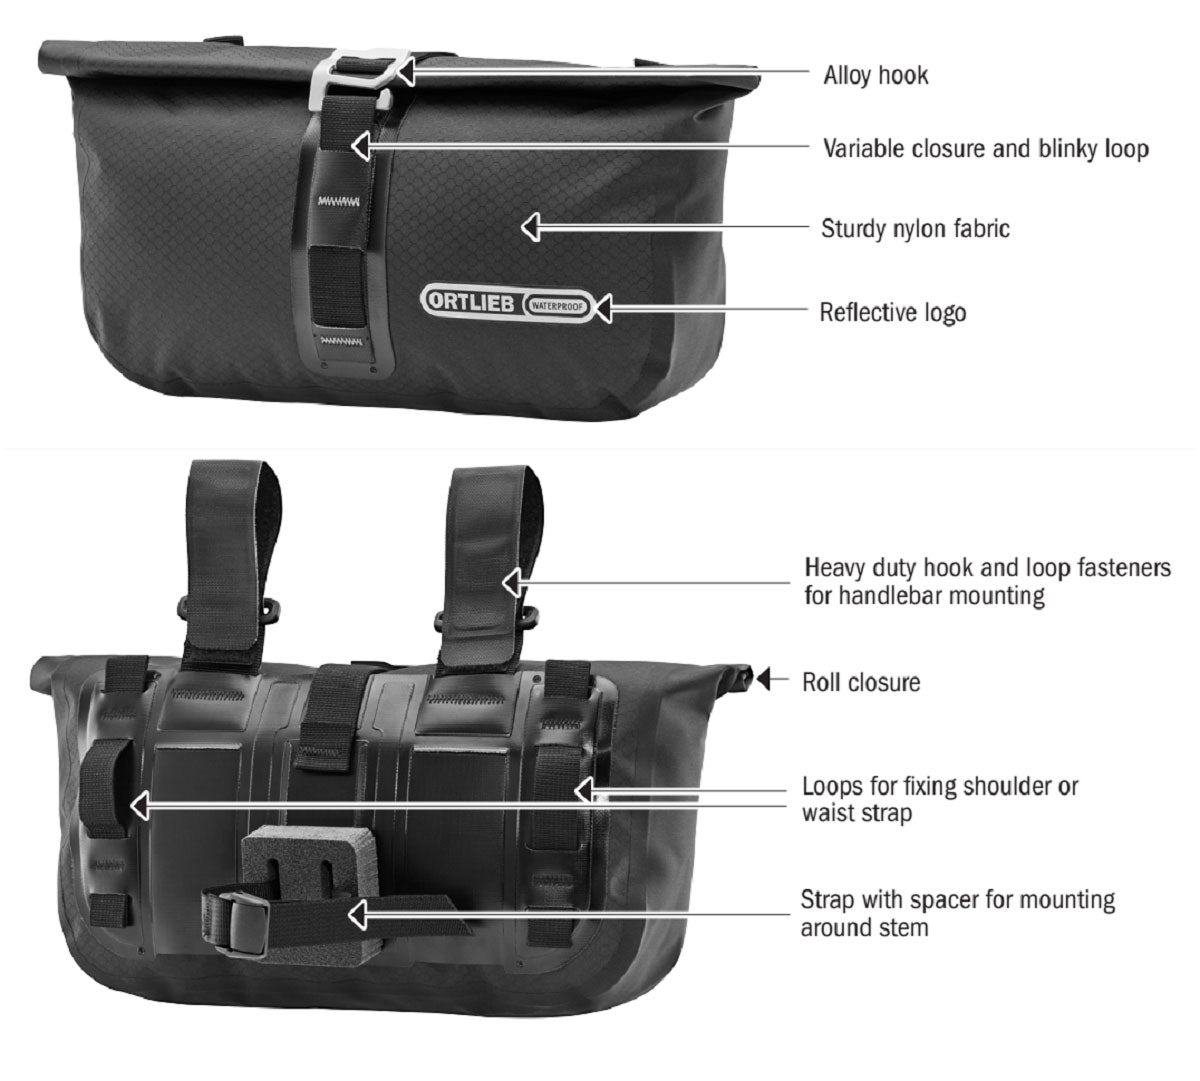 ORTLIEB Accessory Pack Overview